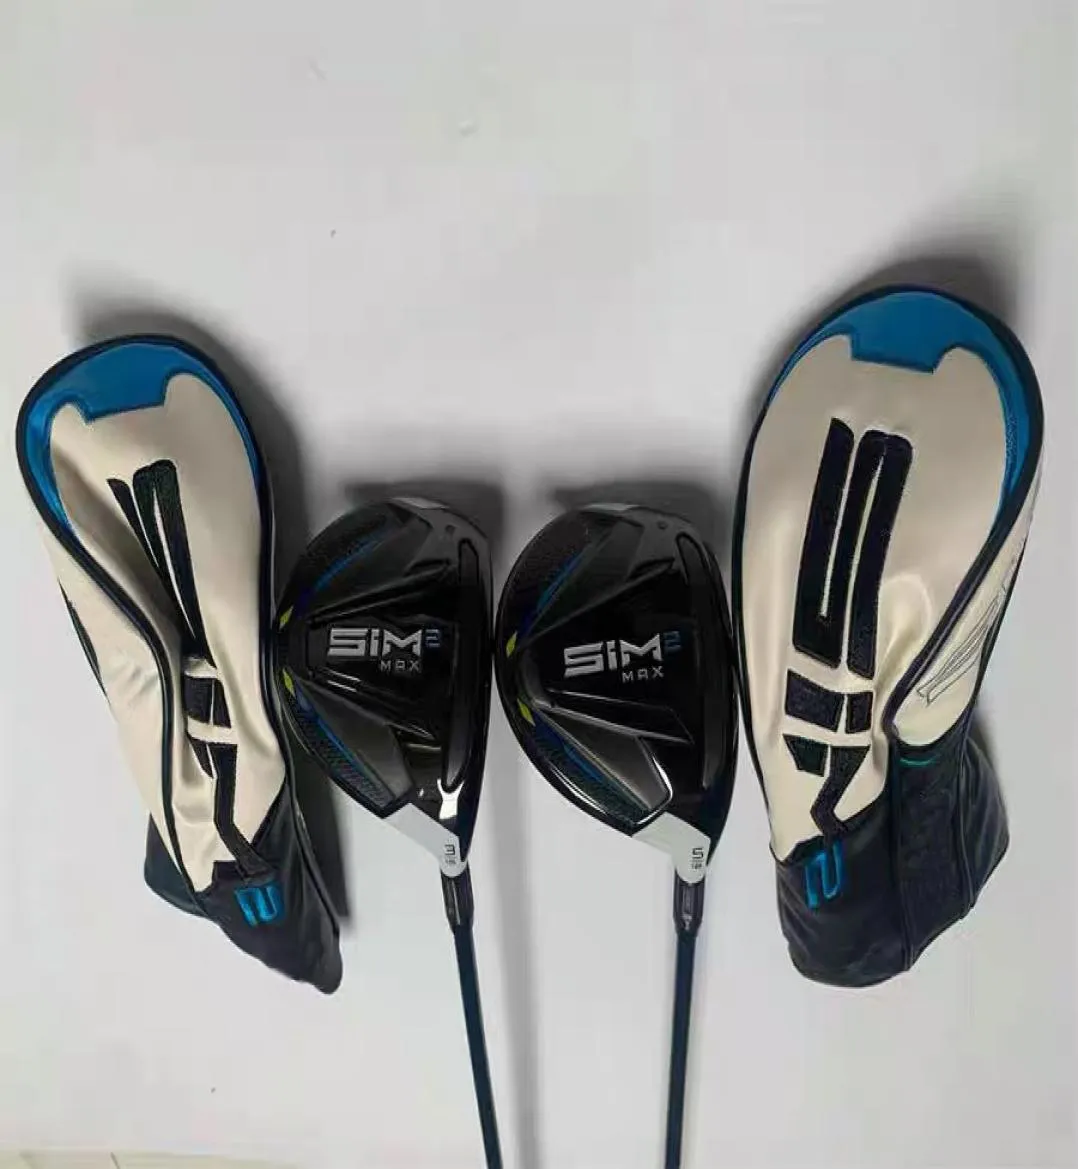 UPSFedEX The Latest Model SIM2 MAX 3 5 Fairway Woods RSRS flex Available Real Pos Contact 5968717